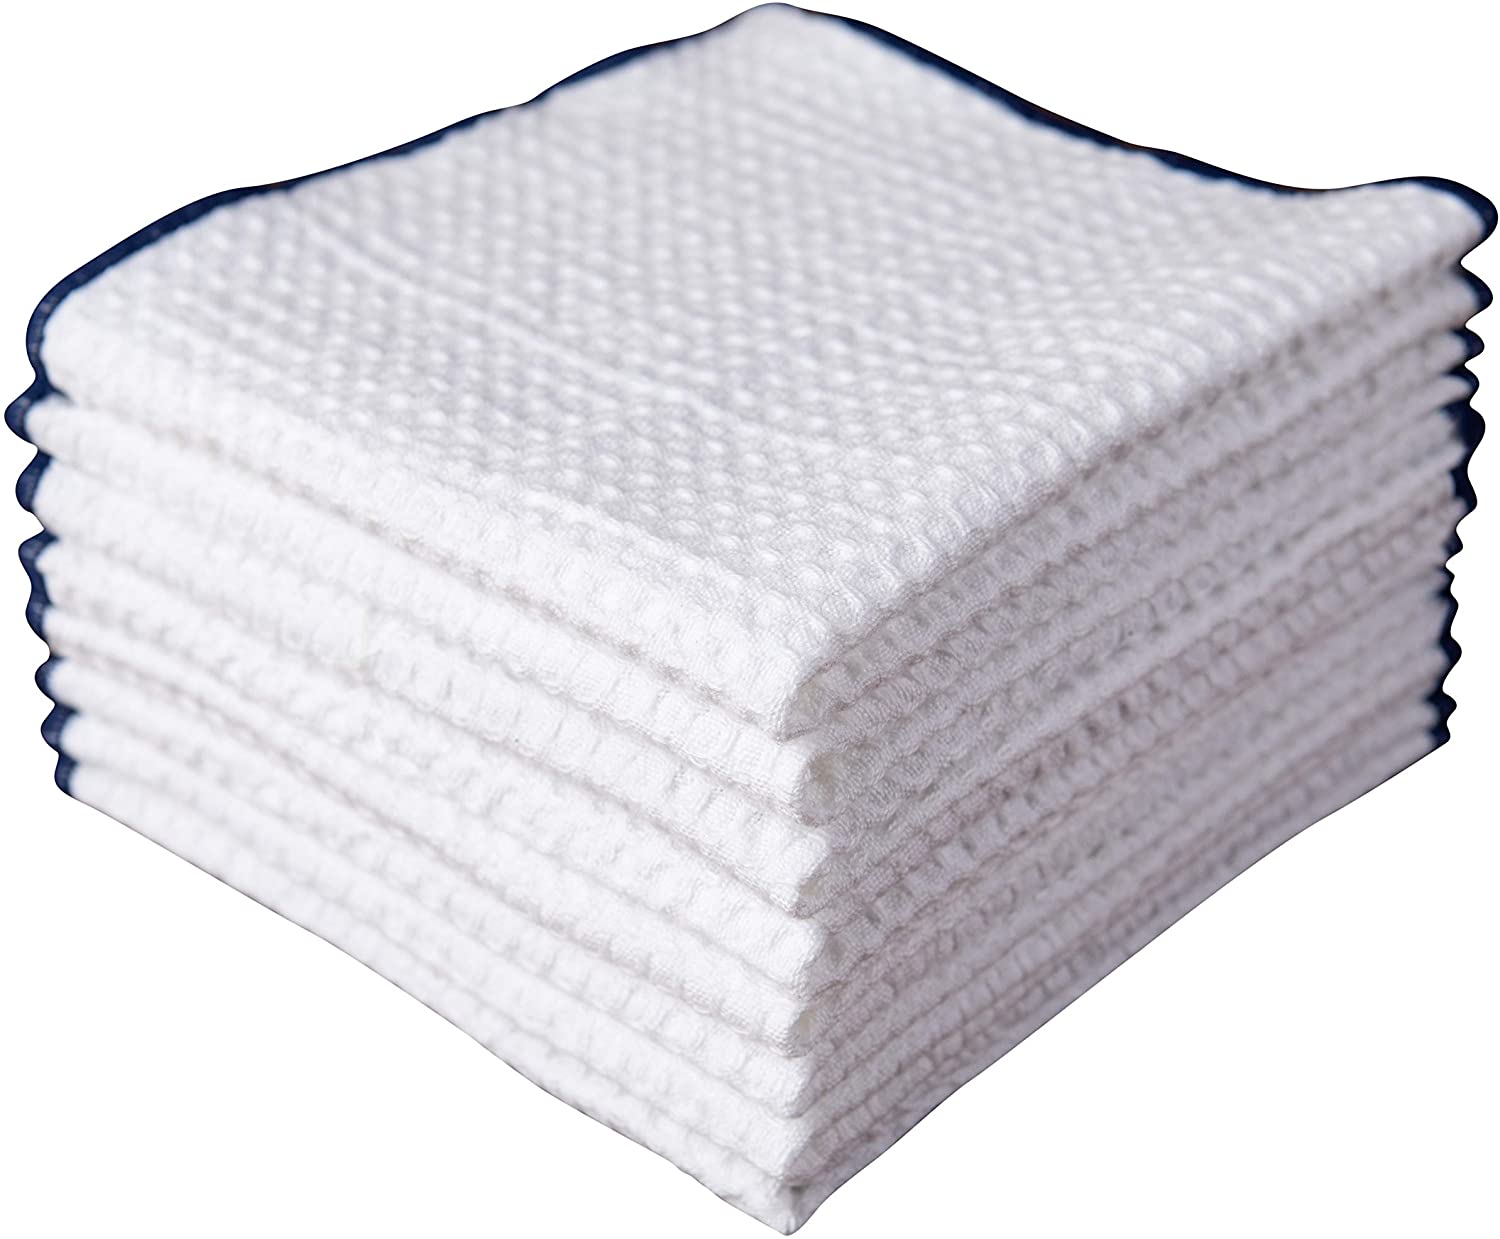 100% Cotton waffle Weave Kitchen Quick Drying Dish Towels 12x12